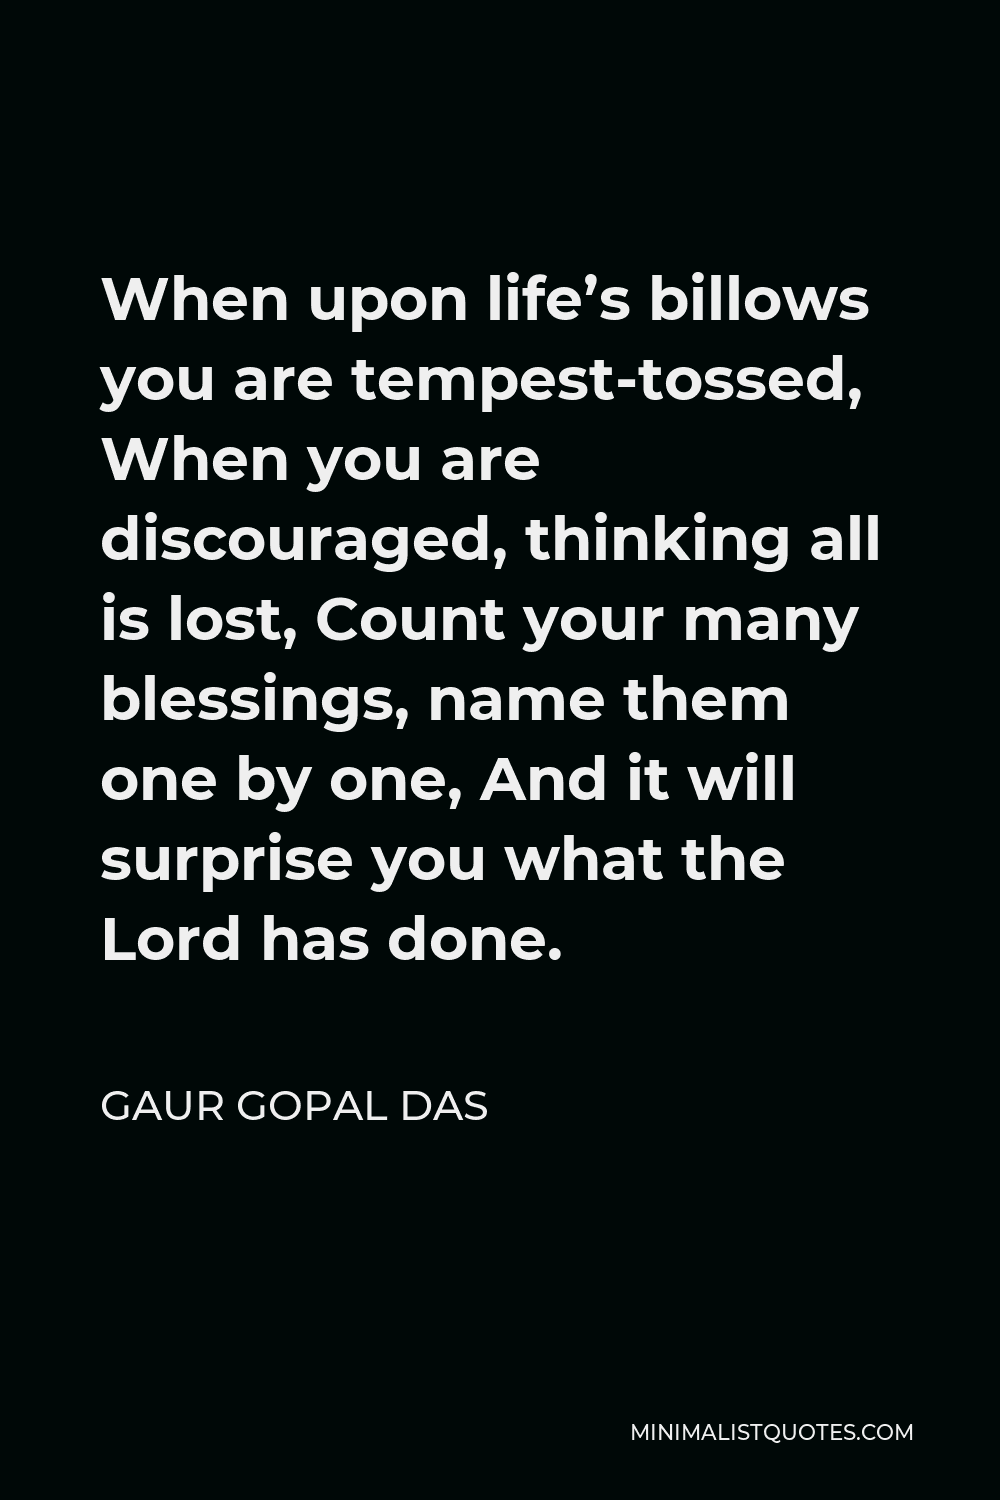 Gaur Gopal Das Quote - When upon life’s billows you are tempest-tossed, When you are discouraged, thinking all is lost, Count your many blessings, name them one by one, And it will surprise you what the Lord has done.